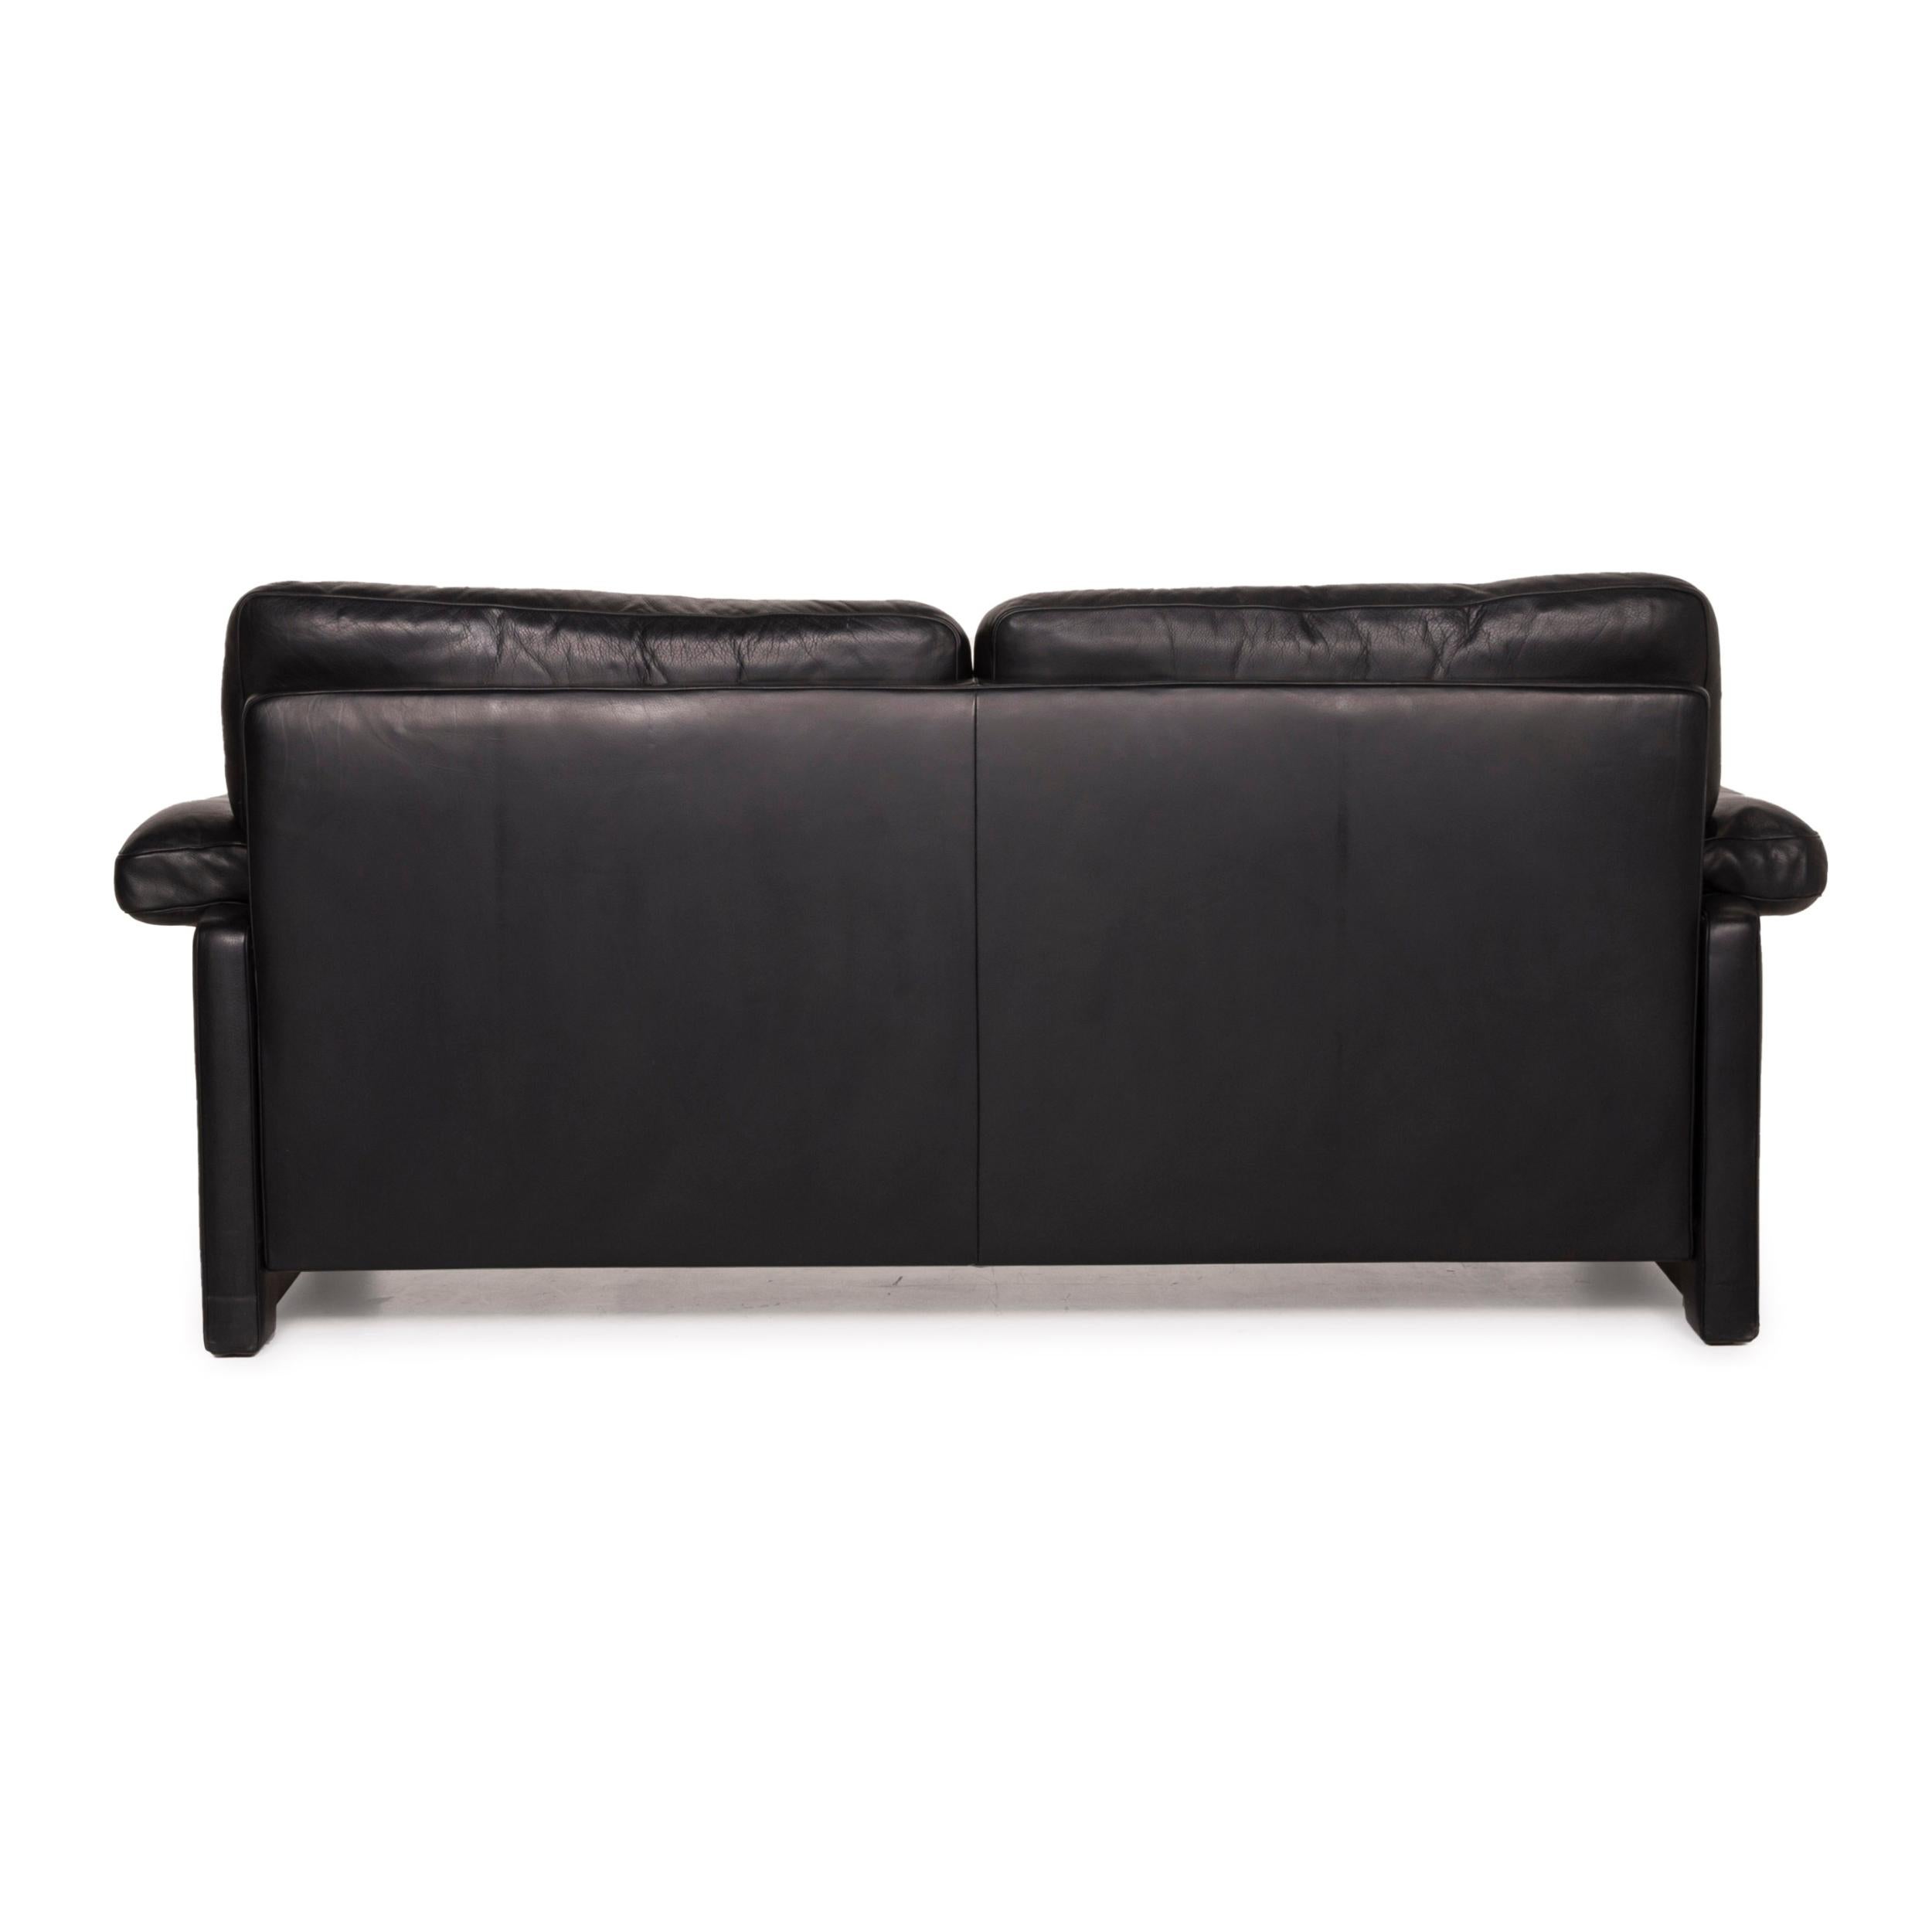 De Sede Ds 70 Leather Sofa Set Black 1x Three-Seater 1x Two-Seater Set For Sale 4